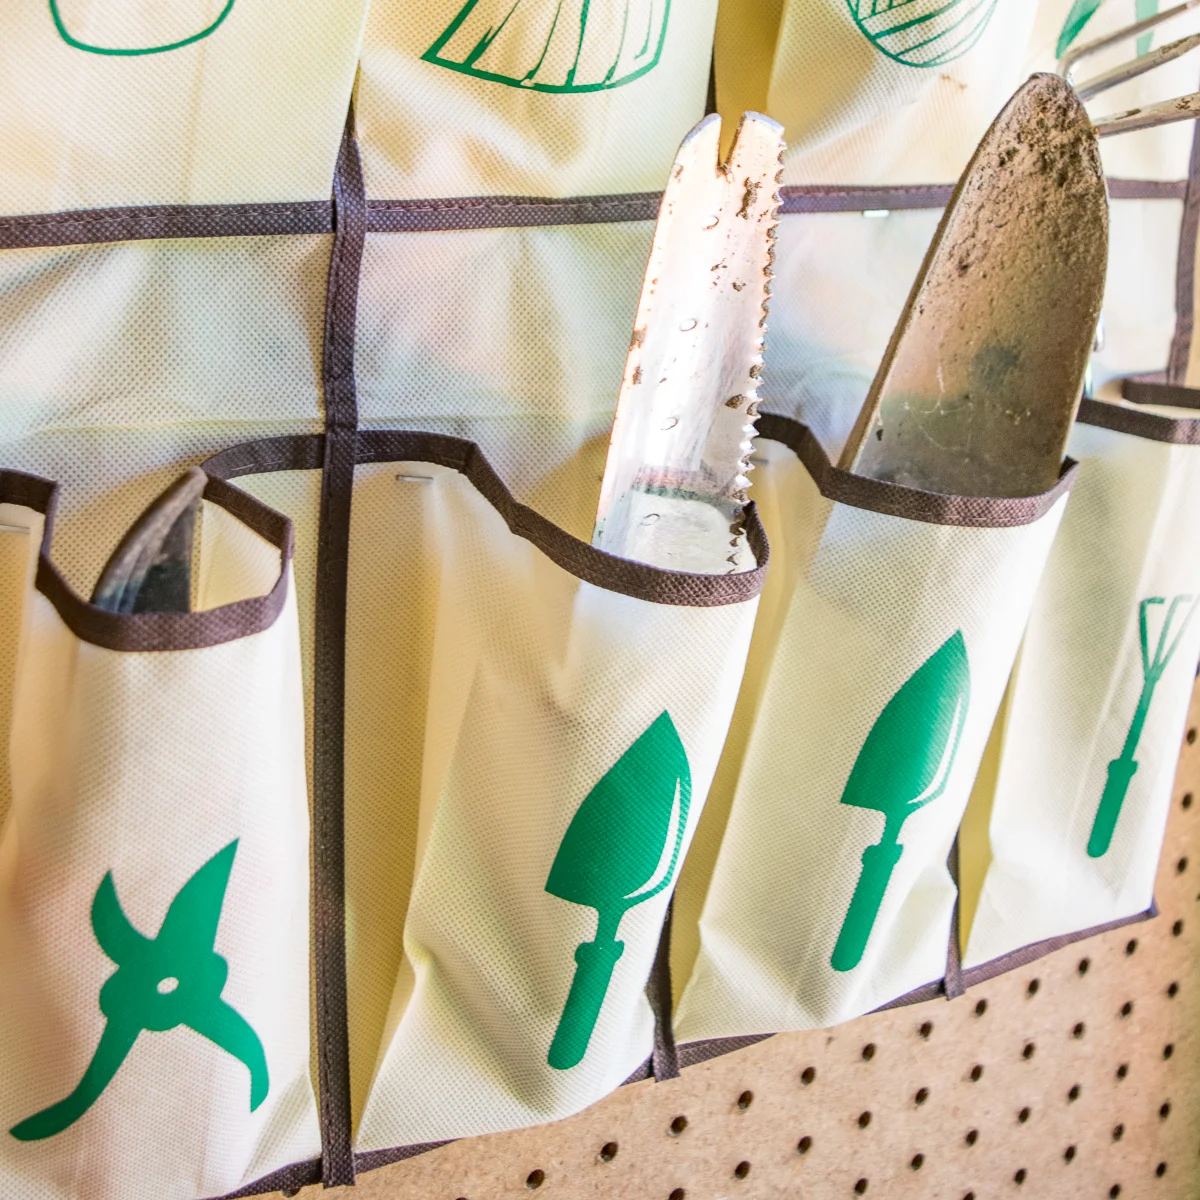 hanging garden tool organizer with labeled pockets for hand gardening tools